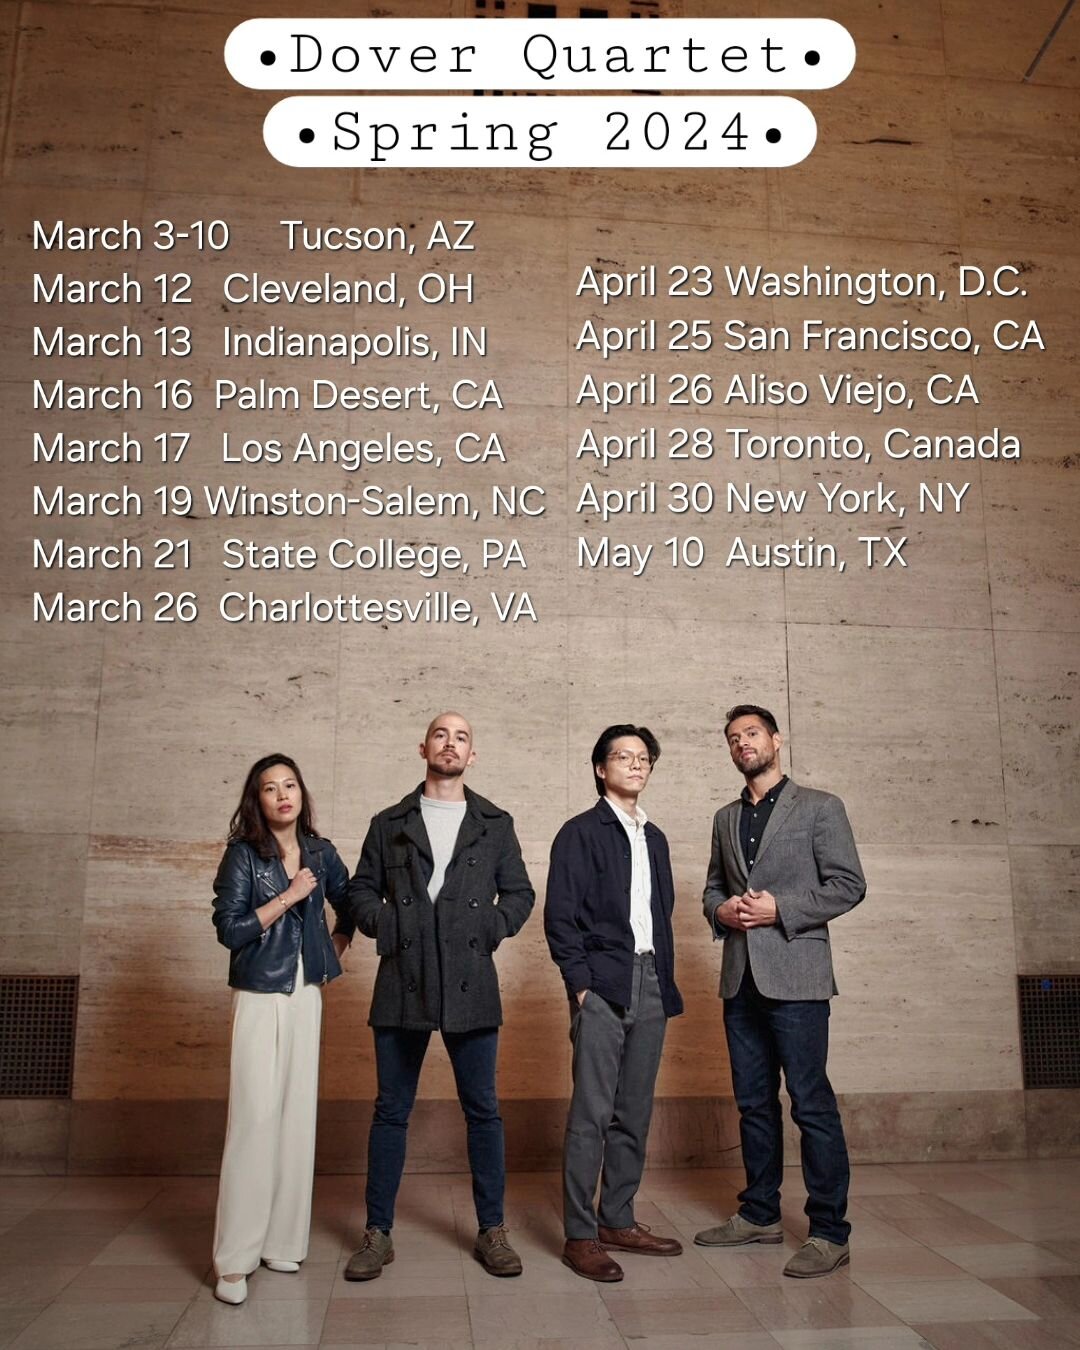 We are so excited for our upcoming concerts, including a fantastic tour with @leifoveandsnes ! Come join us 🎵
For more details, visit: www.doverquartet.com/schedule 
See you soon!
&bull;
&bull;
&bull;
#tourdates #concerts #stringquartet #pianoquinte